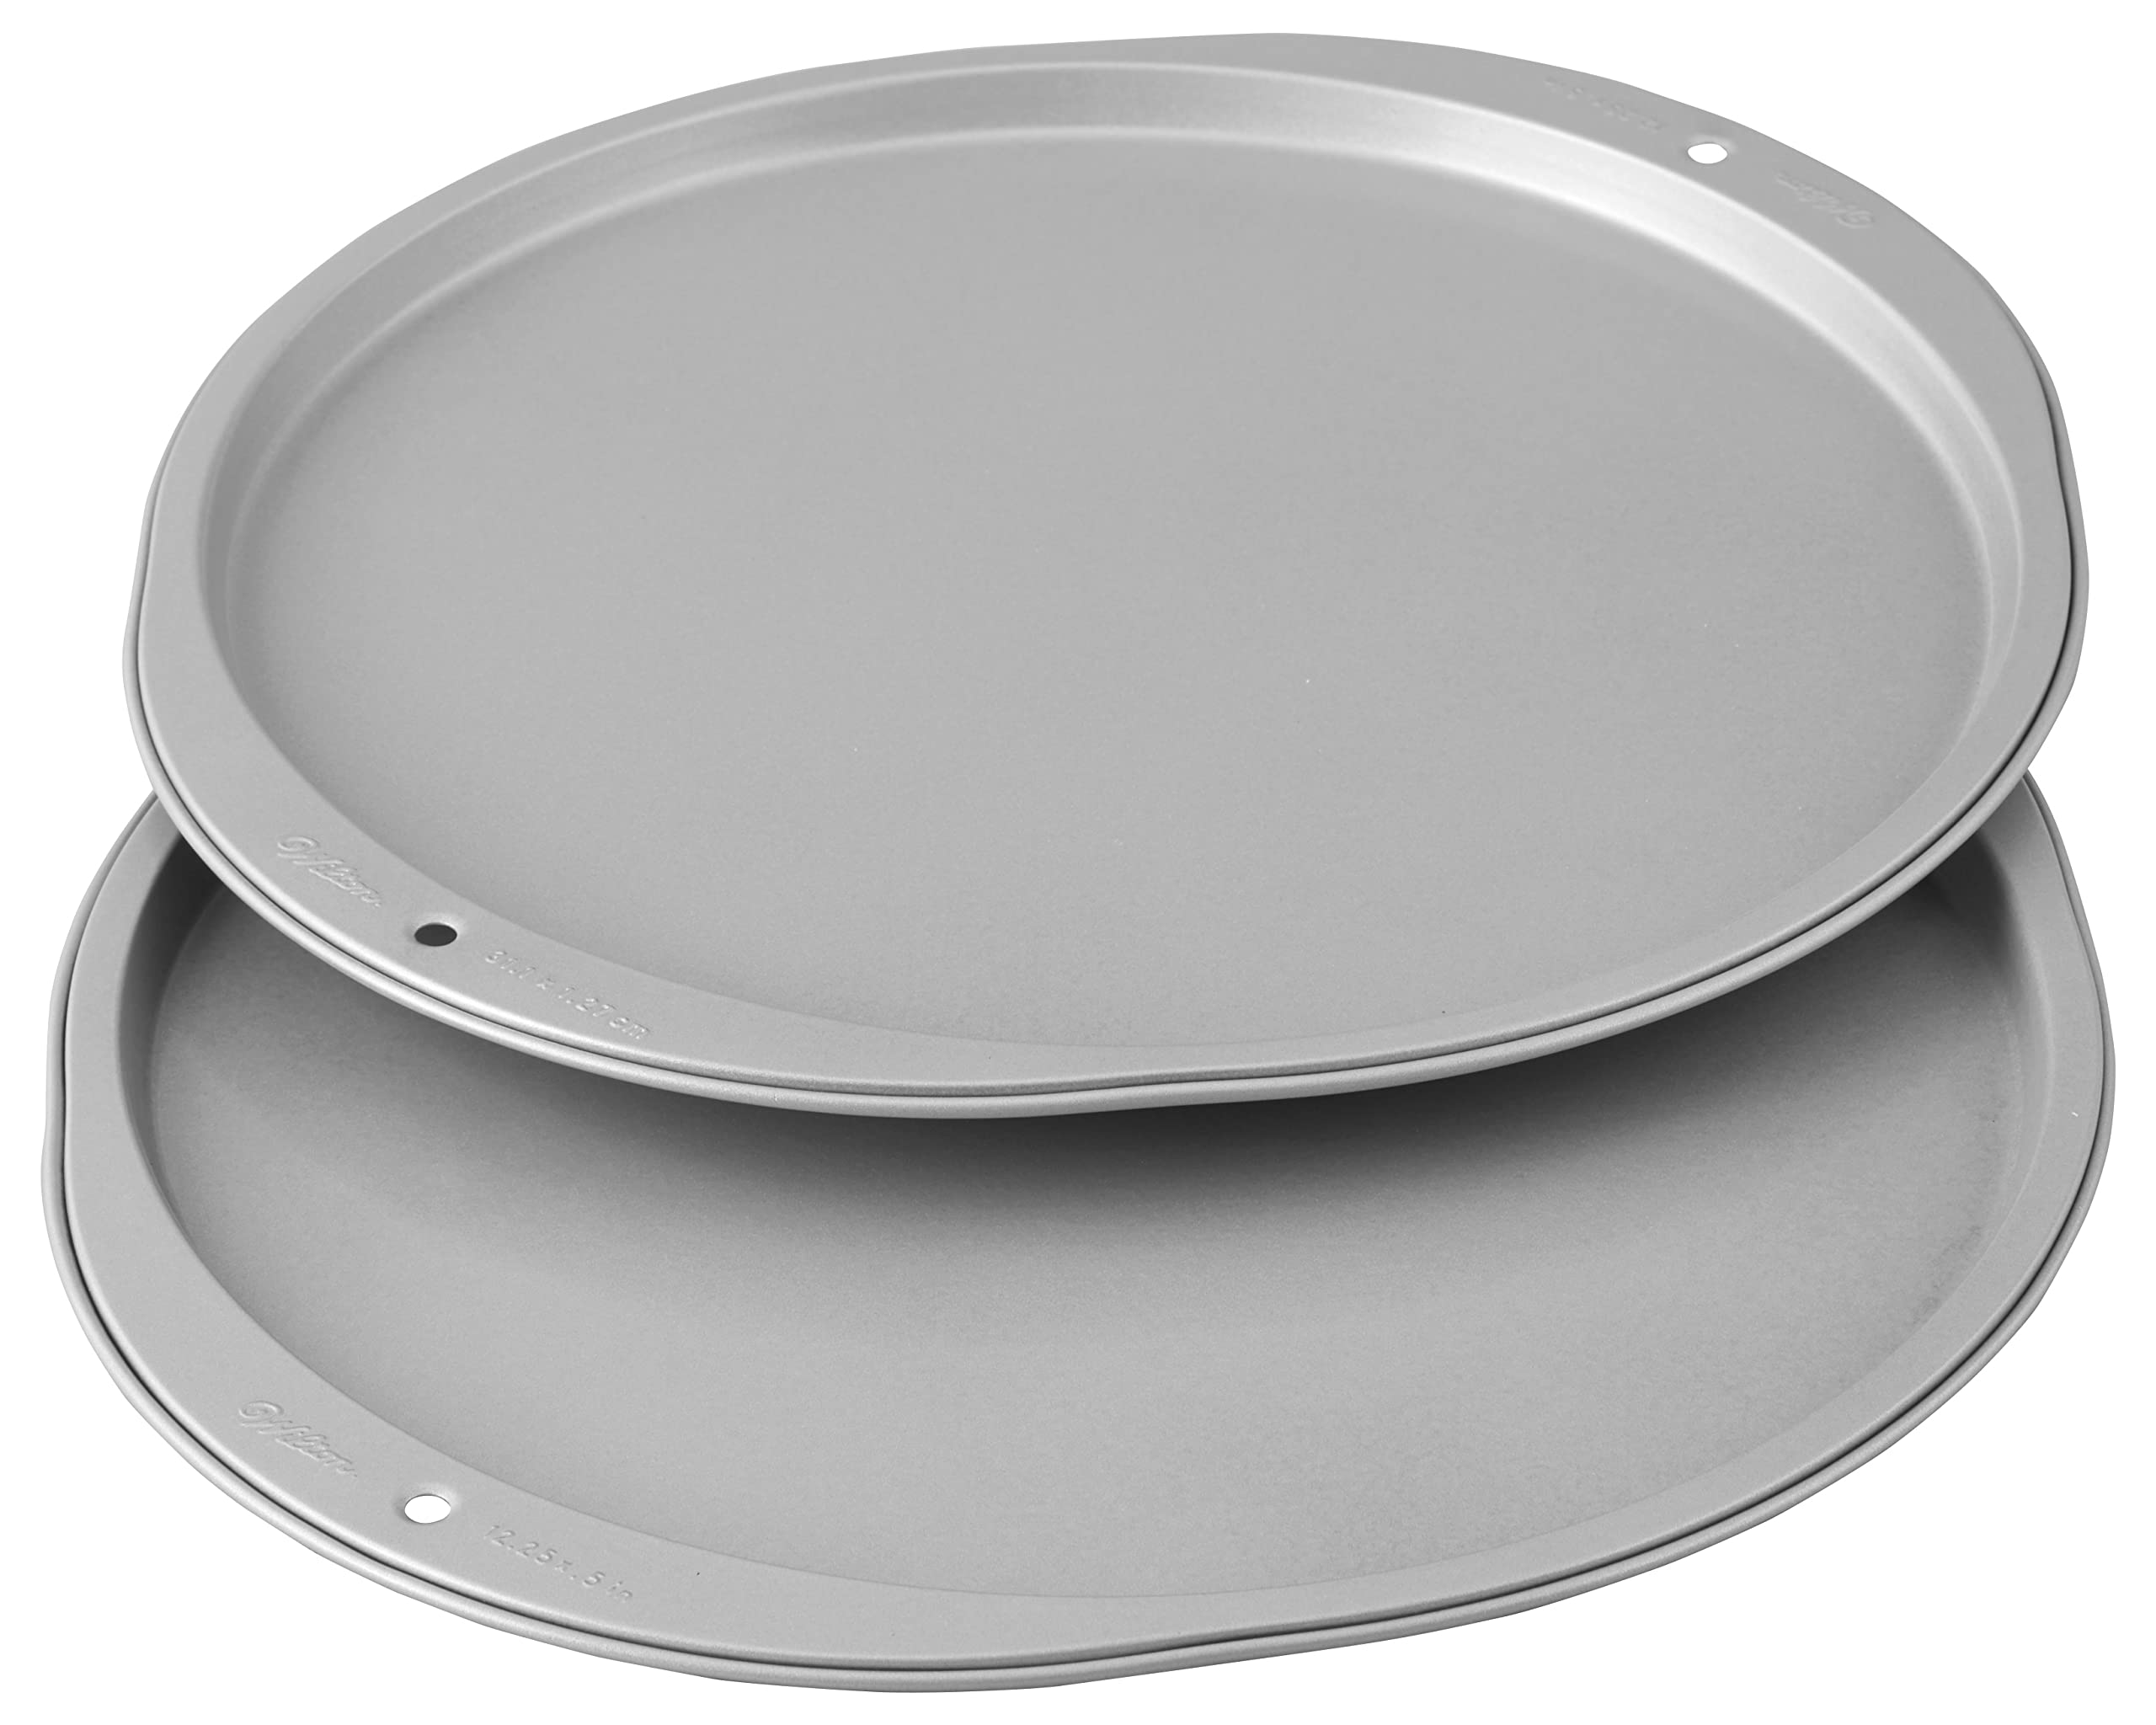 Wilton Perfect Results Premium Non-Stick Bakeware Pizza Pan for Oven, 14-Inch Steel Pan & Recipe Right 12-Inch Pizza Pans, 2-Piece Set, Steel